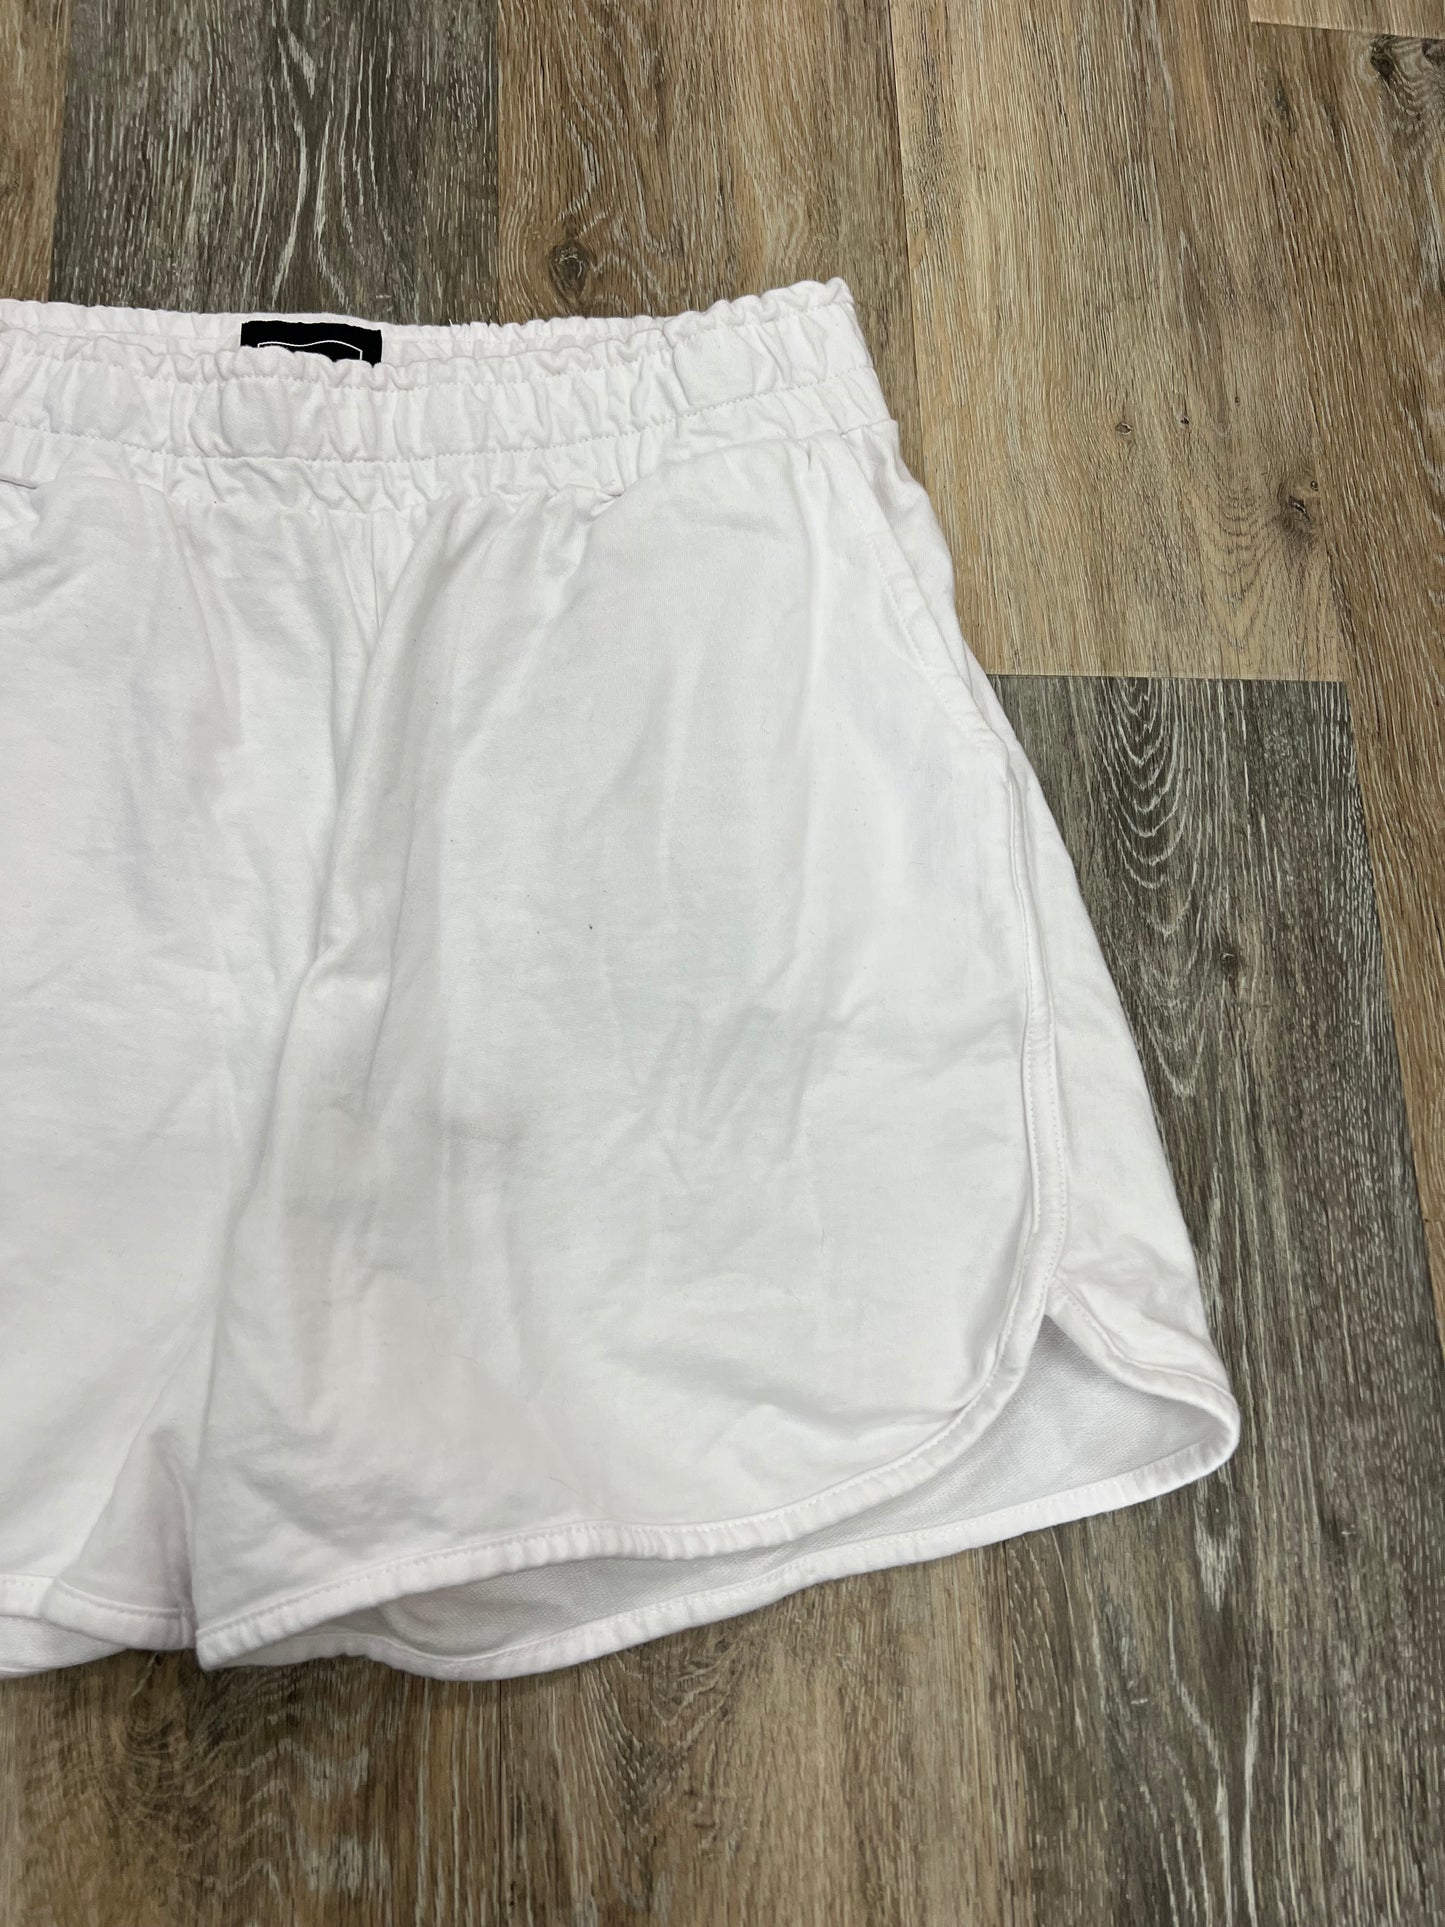 Shorts By Lily and Lottie Size: M/L